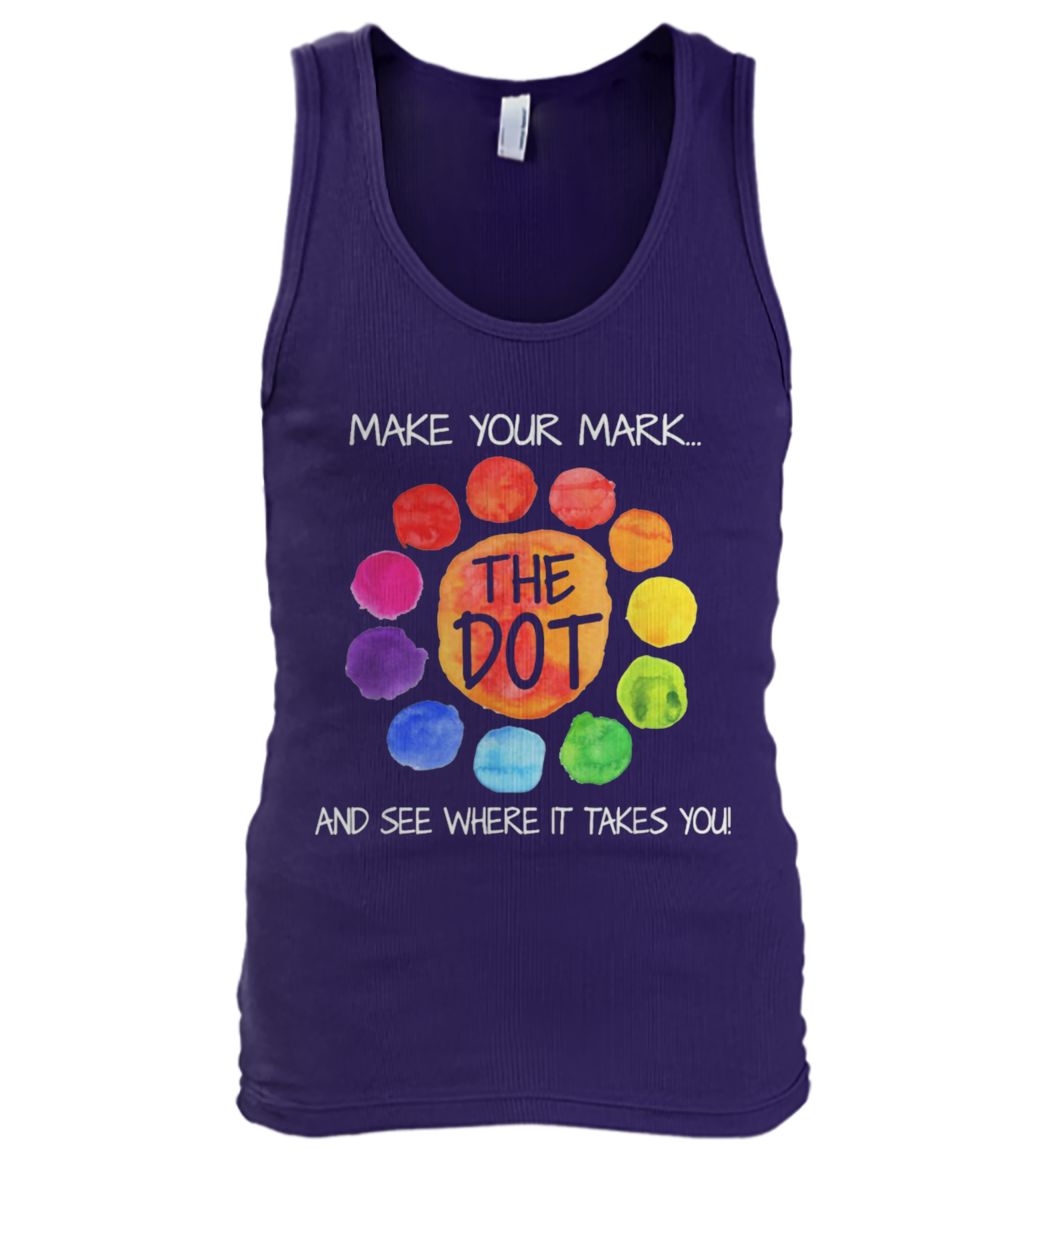 The dot day 2019 make your mark and see where it takes you men's tank top